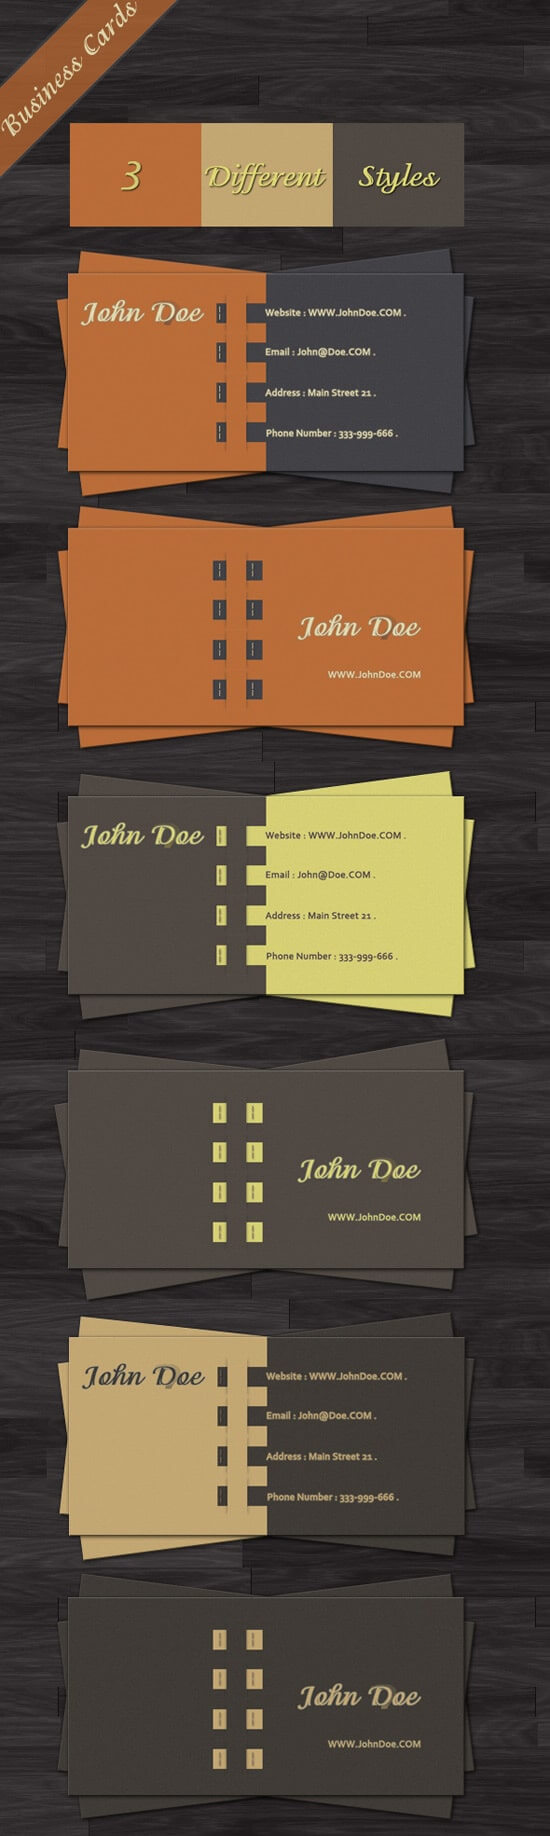 100 Free Business Card Templates – Designrfix With Gimp Business Card Template